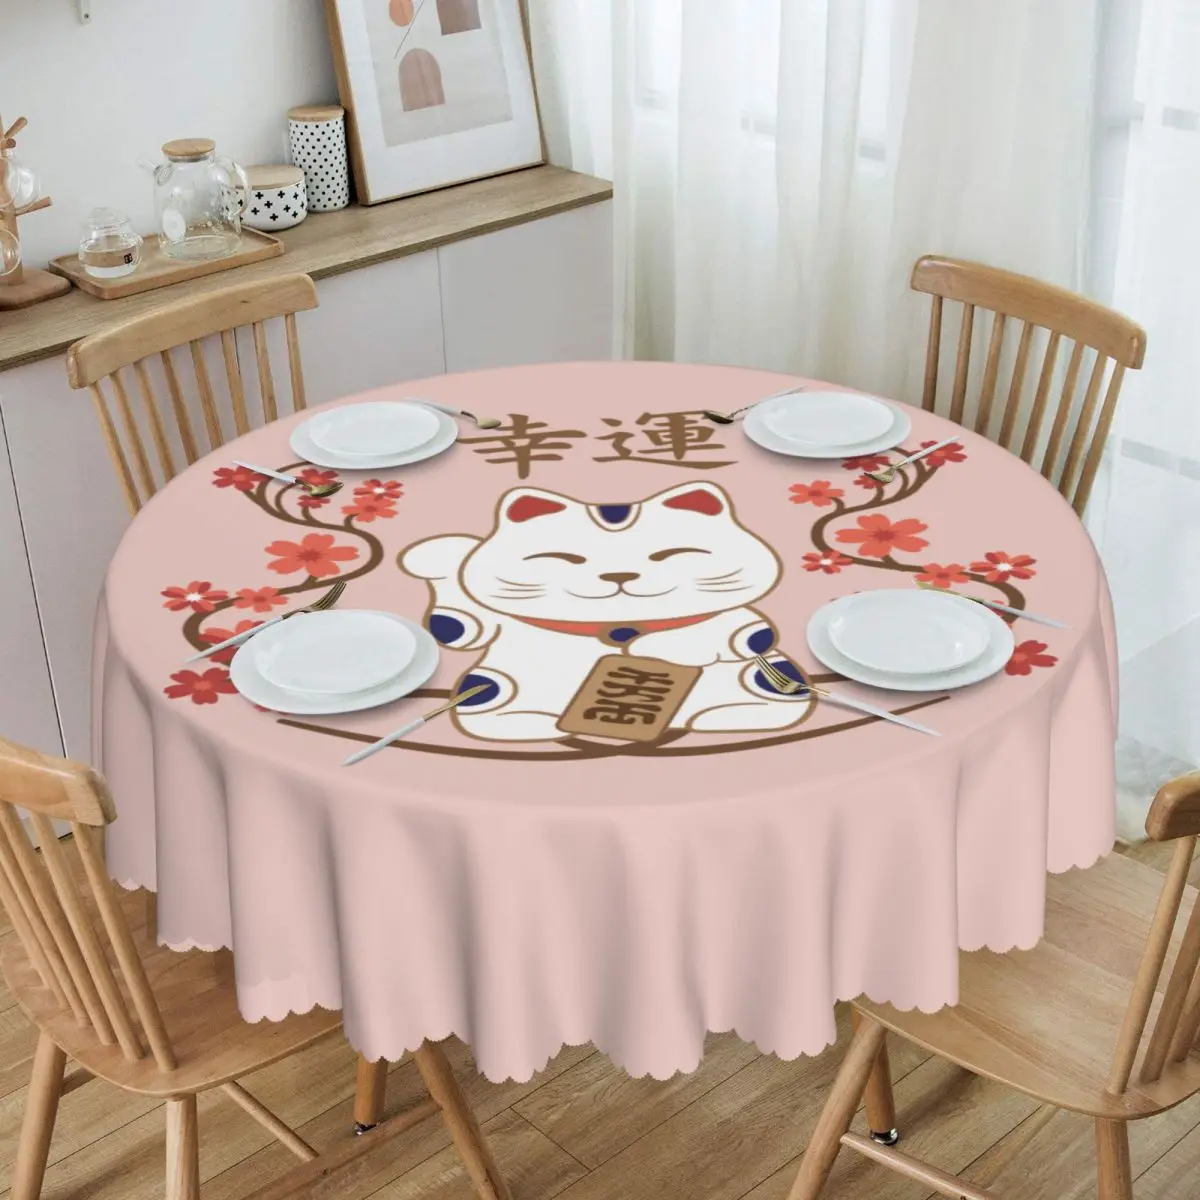 

Round Maneki Neko Cat With Good Luck Kanji Tablecloth Waterproof Oil-Proof Table Cover 60 inch Table Cloth